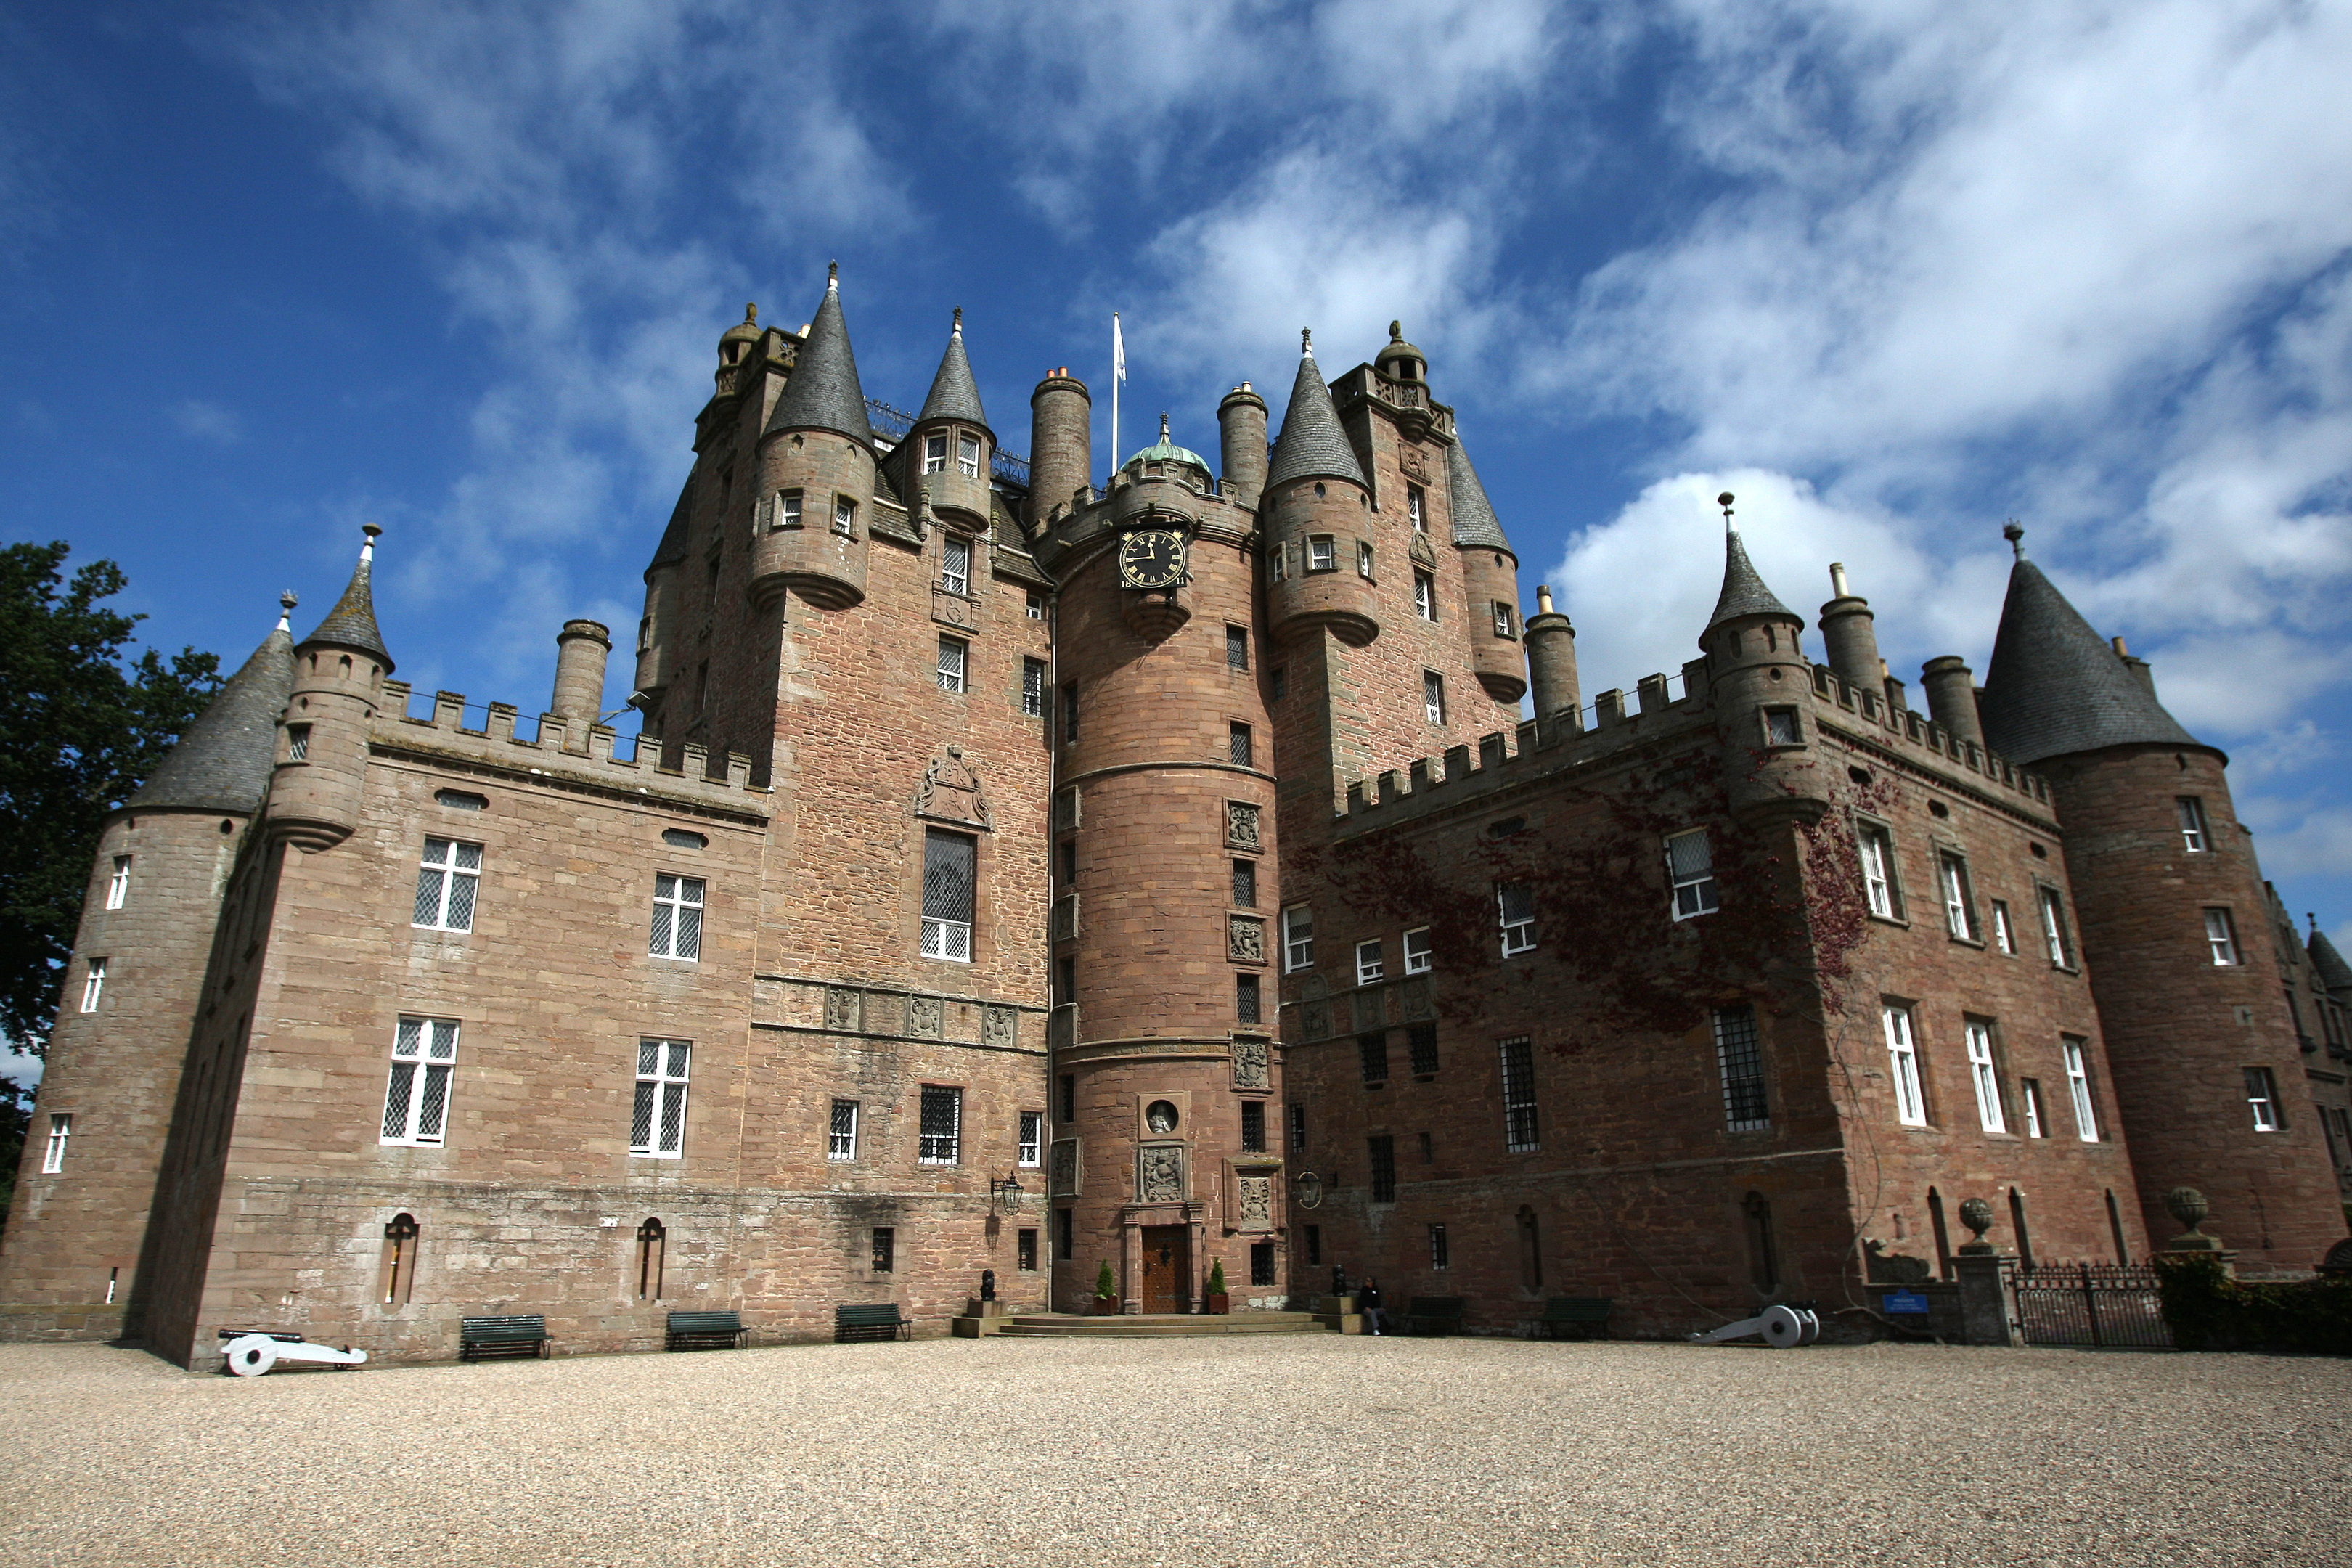 The tragedy happened near Glamis Castle.